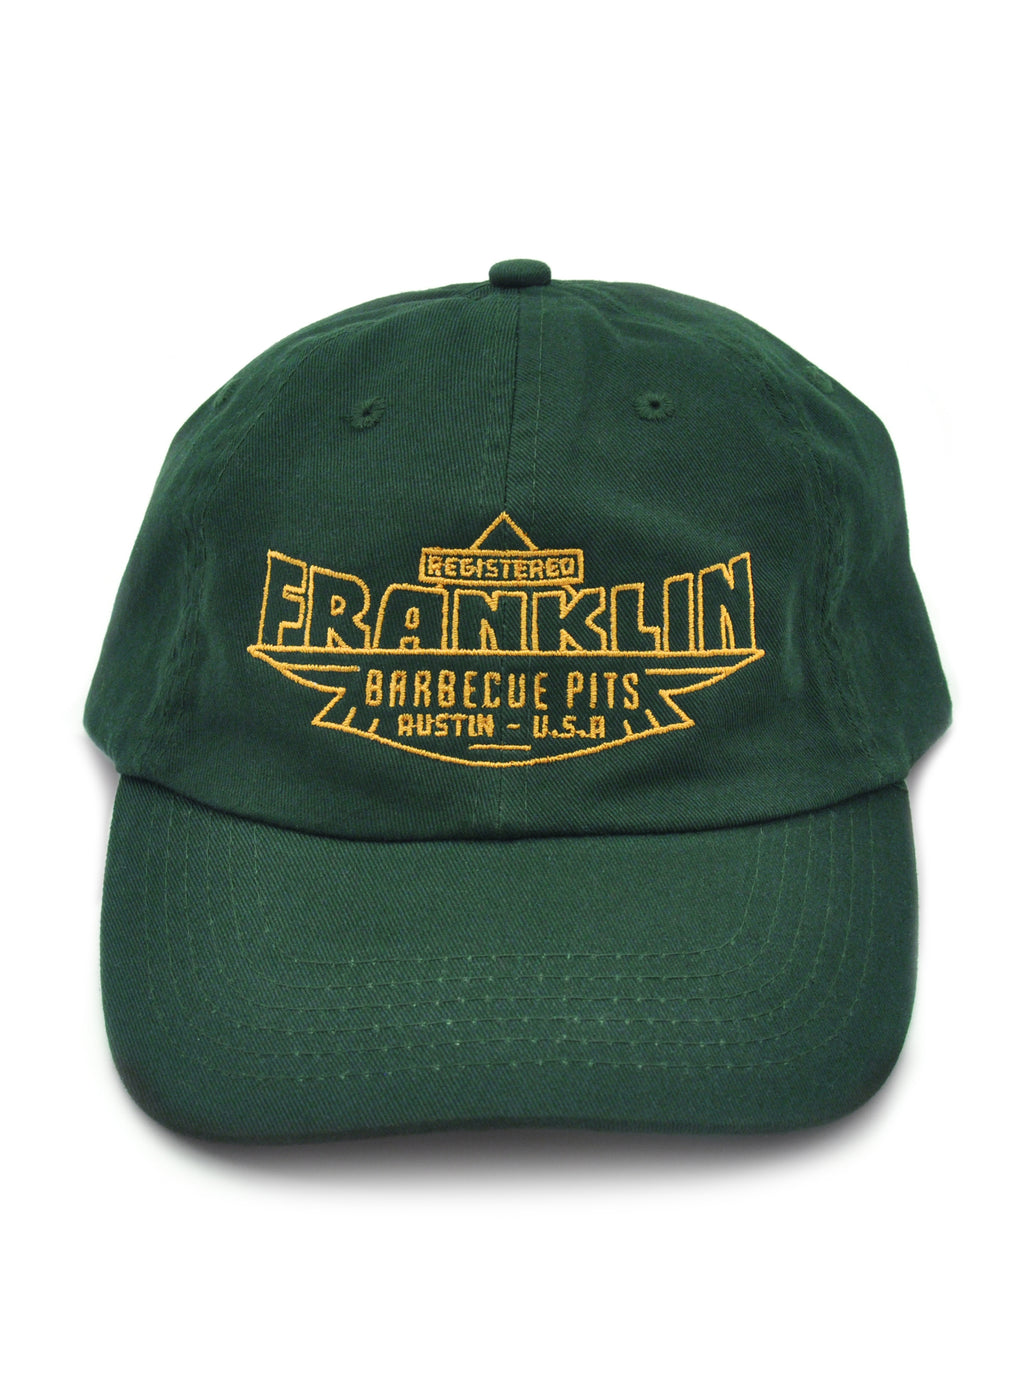 Dark green hat with logo saying "Registered Franklin Barbecue Pits Austin U.S.A." in yellow